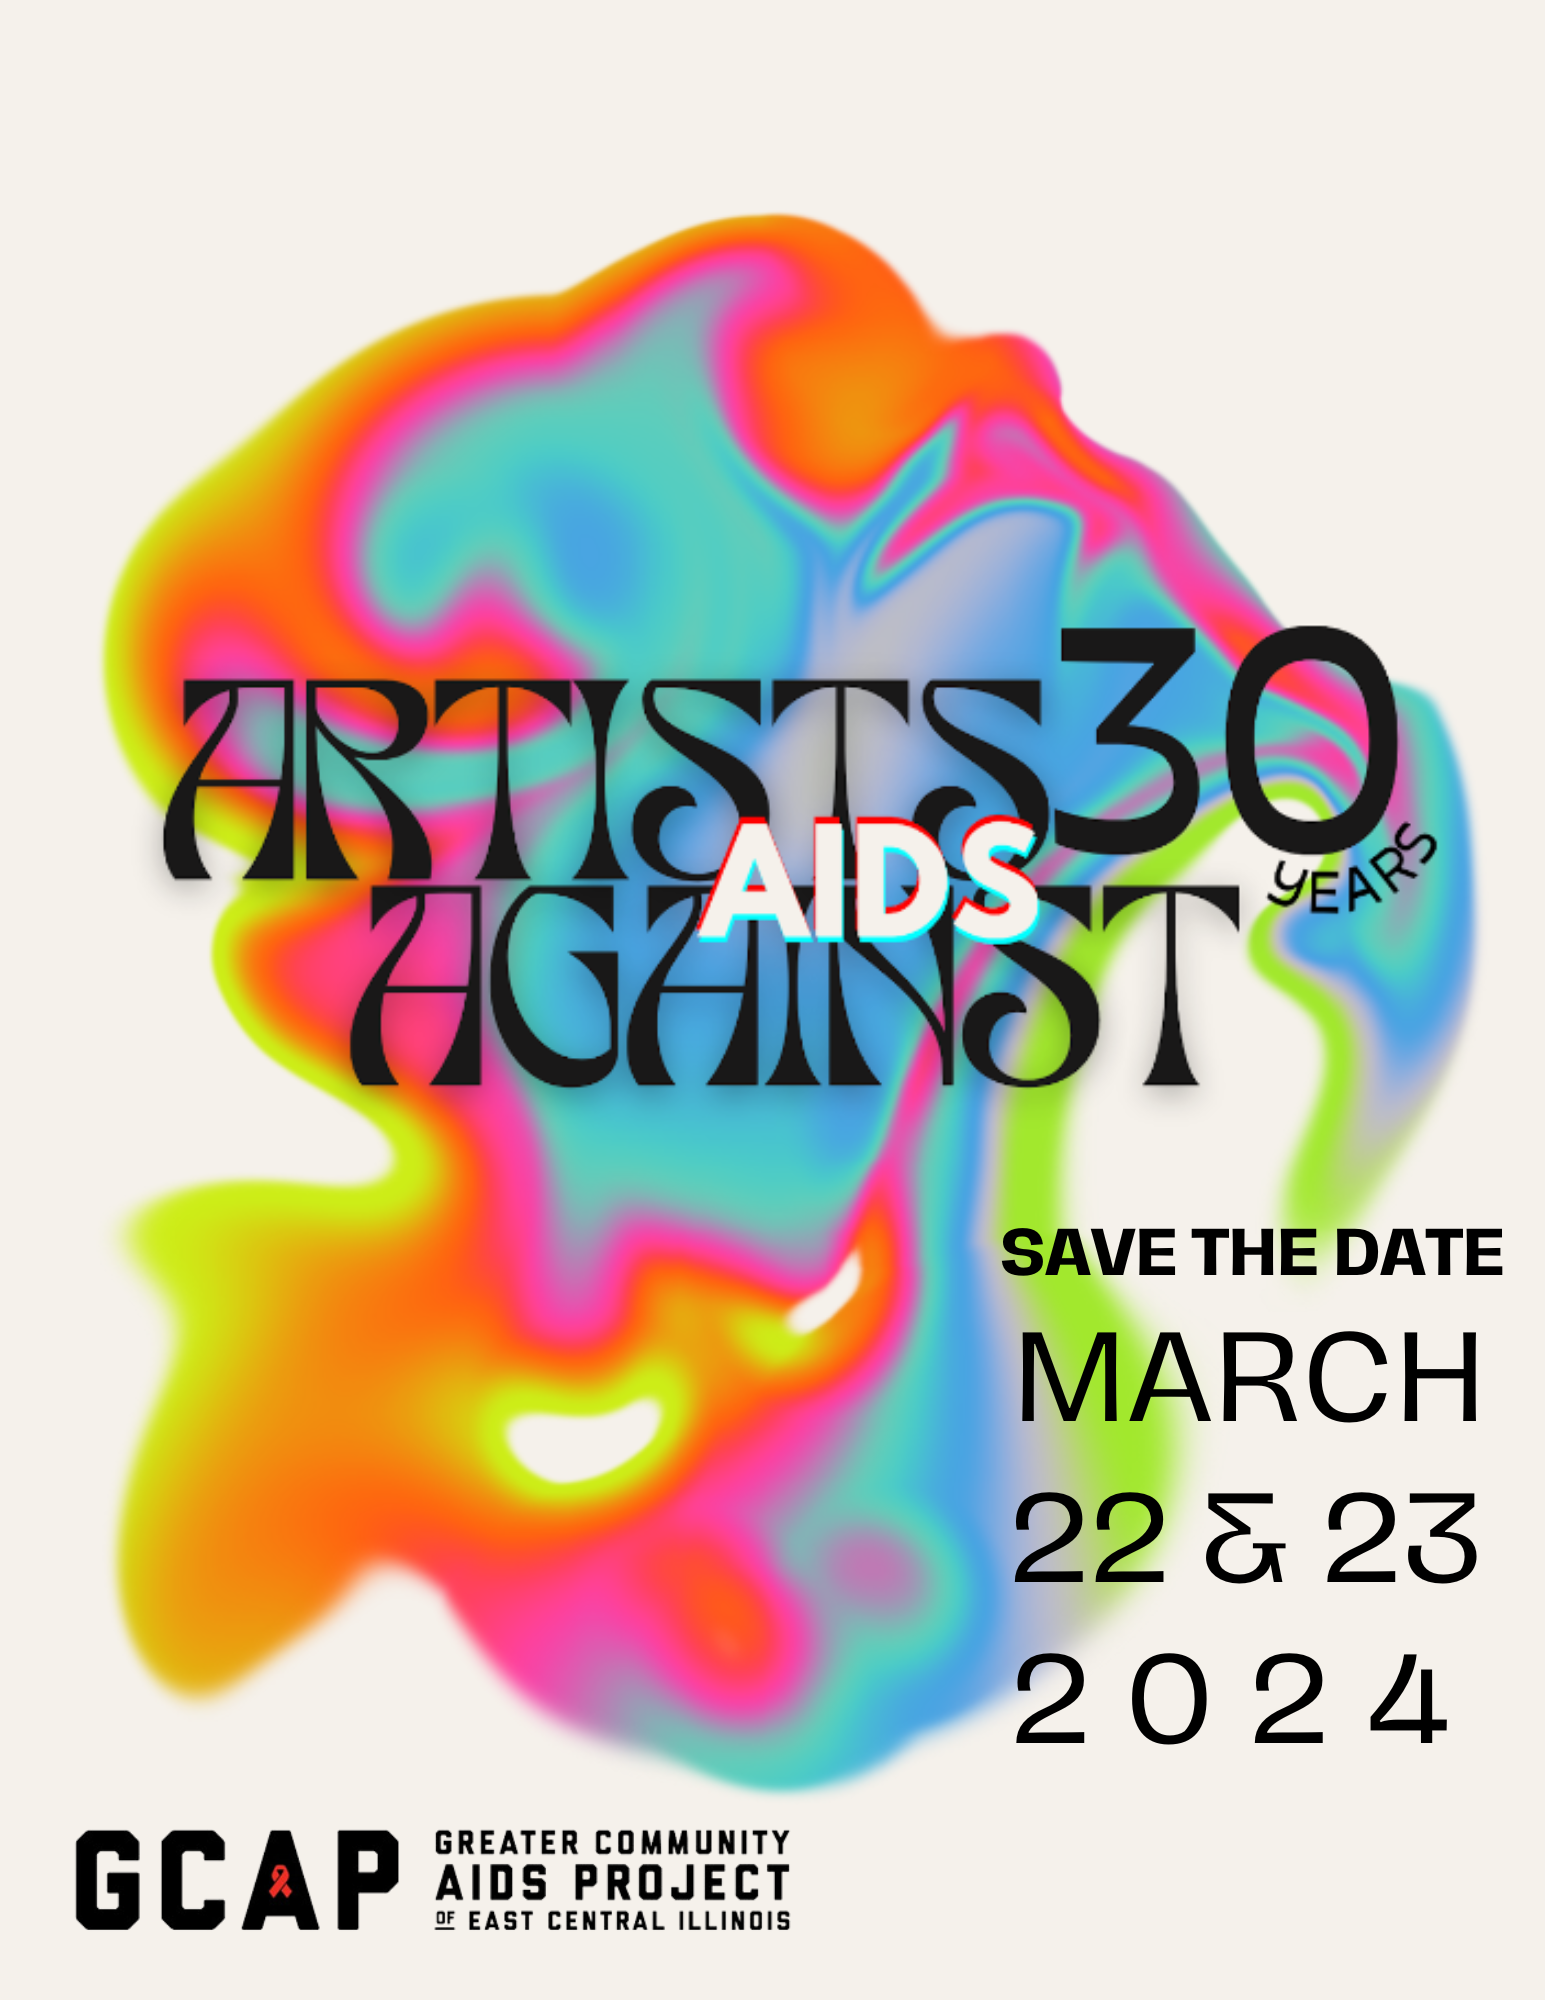 "Save the Date: March 22nd and 23rd. Artists Against AIDS 30 years". written on a tan background with tye dye artistic embellishments